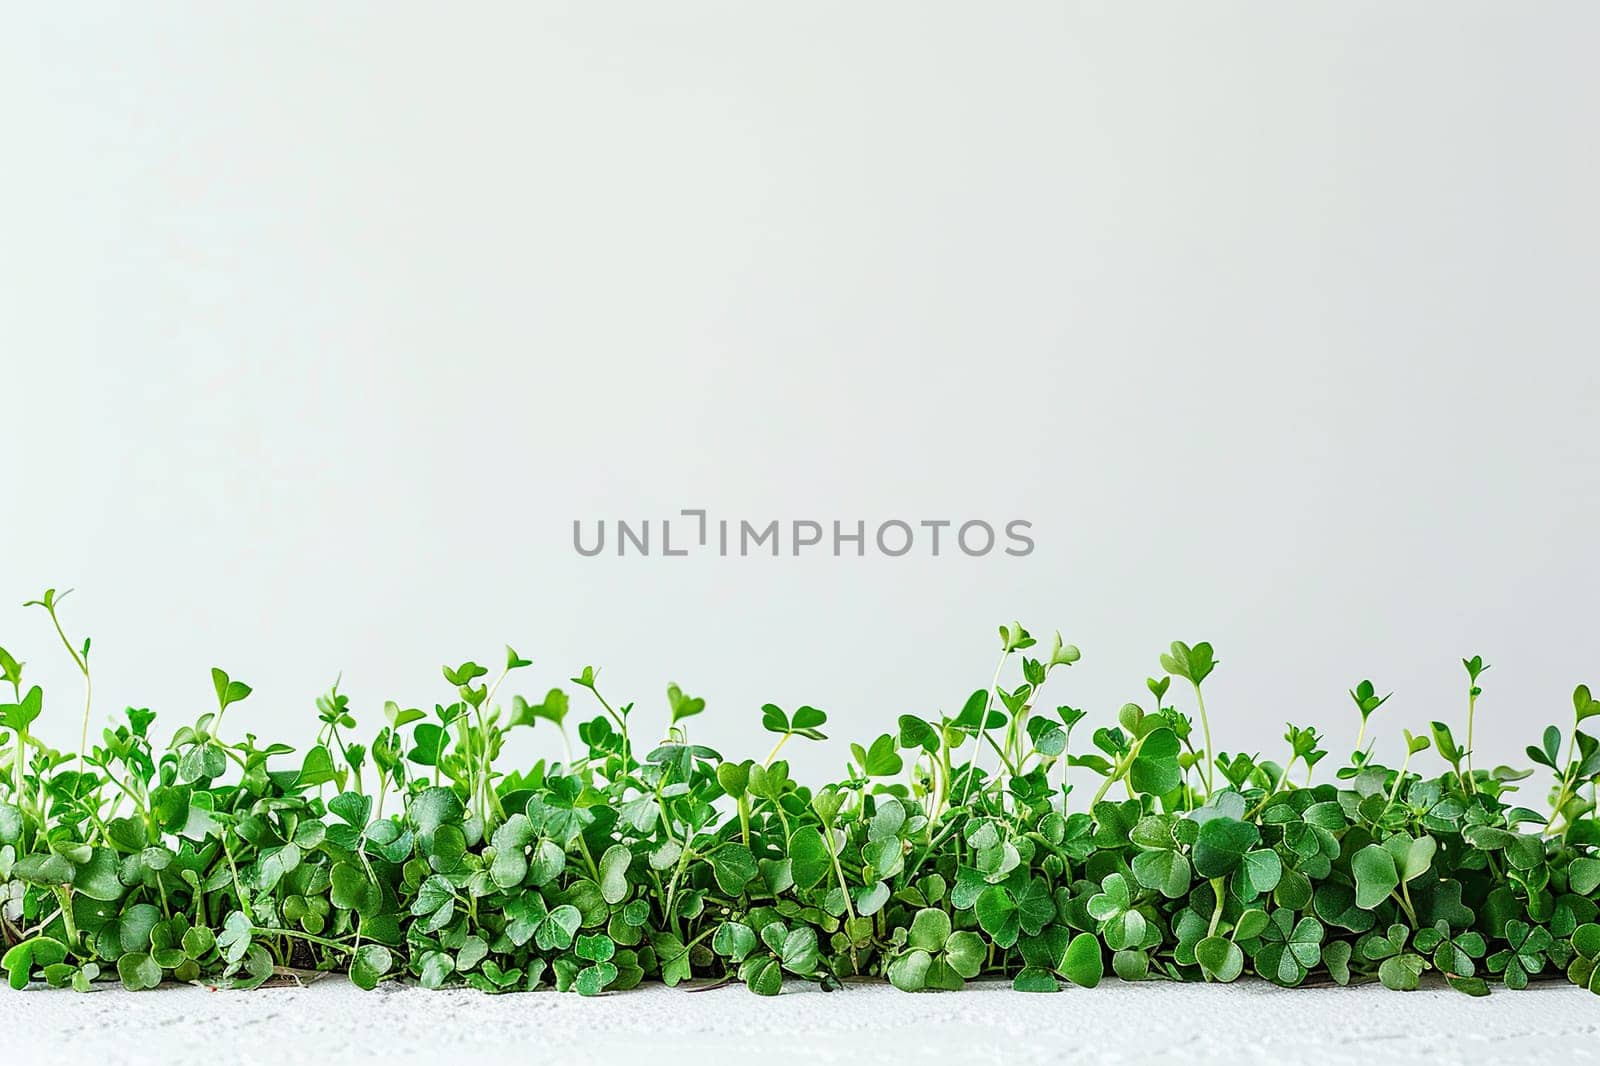 Horizontal white background with lush, dense microgreens underneath. Eco vegan healthy lifestyle bio banner. Generated by artificial intelligence by Vovmar